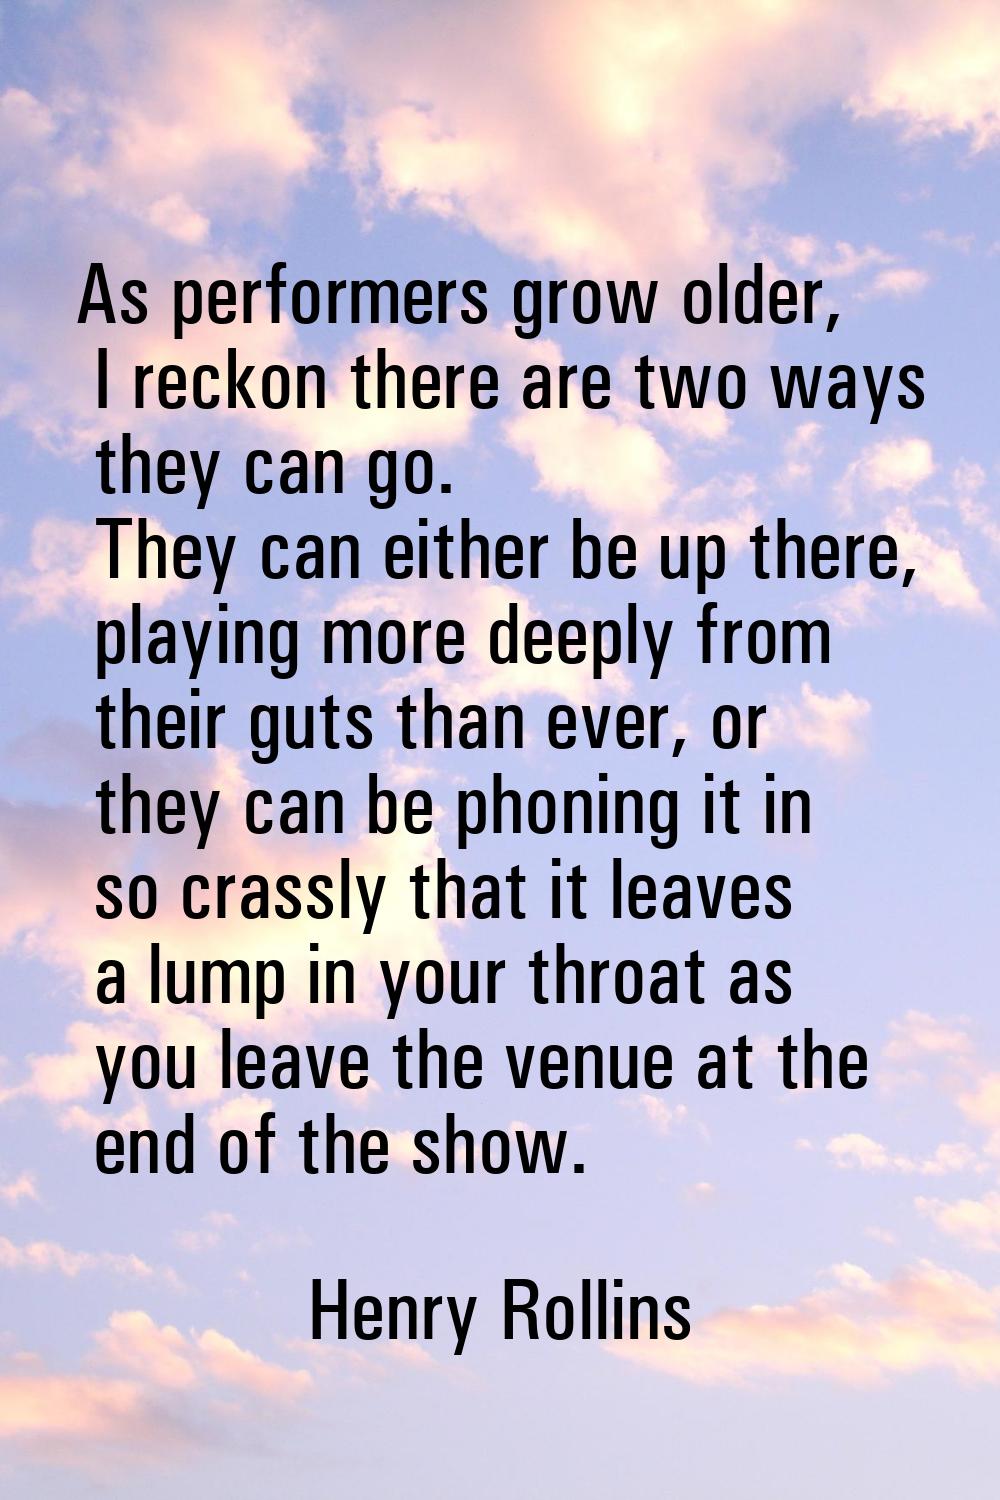 As performers grow older, I reckon there are two ways they can go. They can either be up there, pla